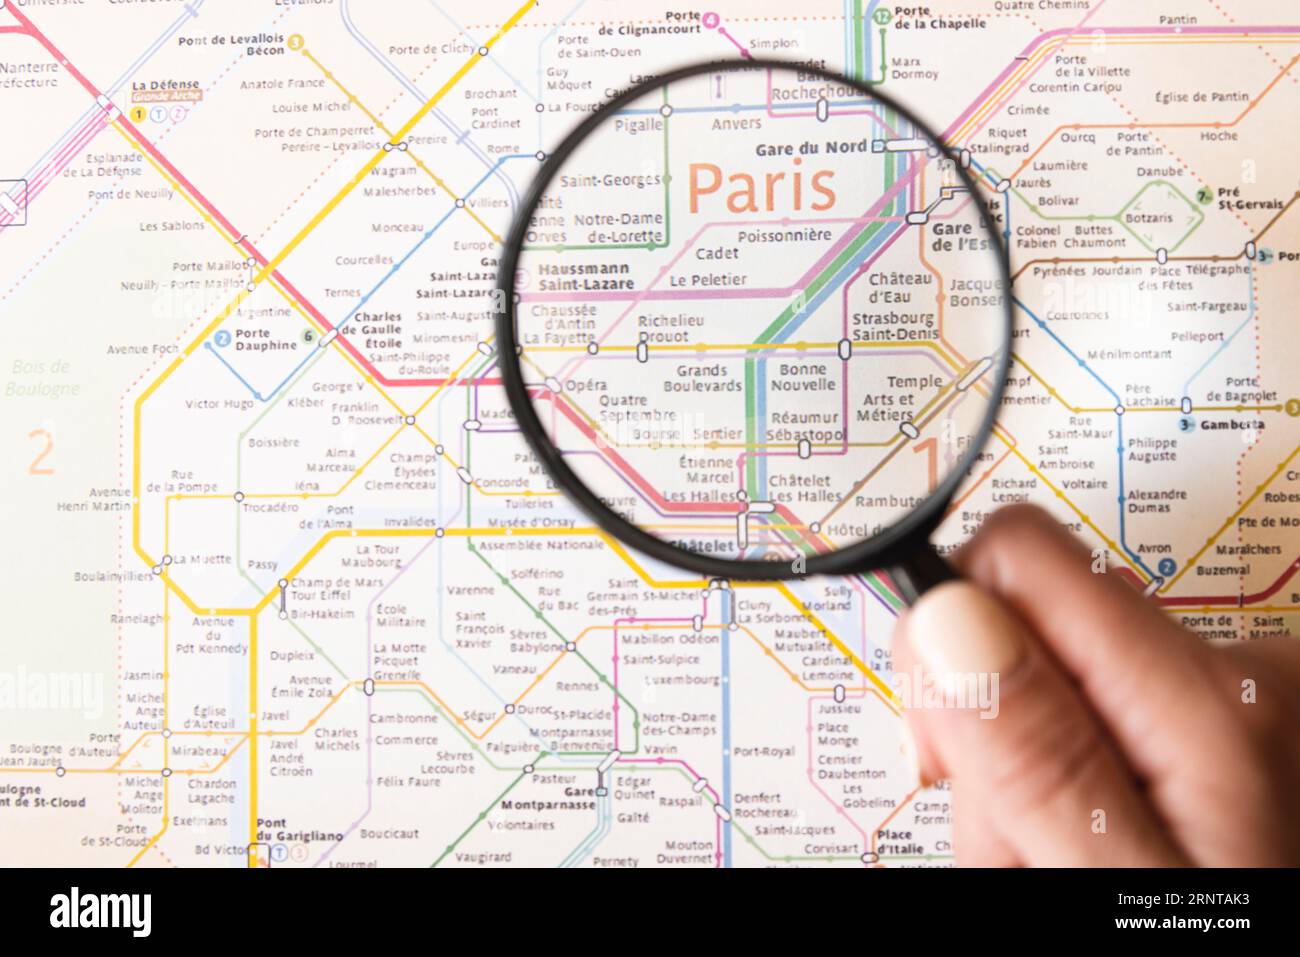 Paris metro map with magnifying glass Stock Photo